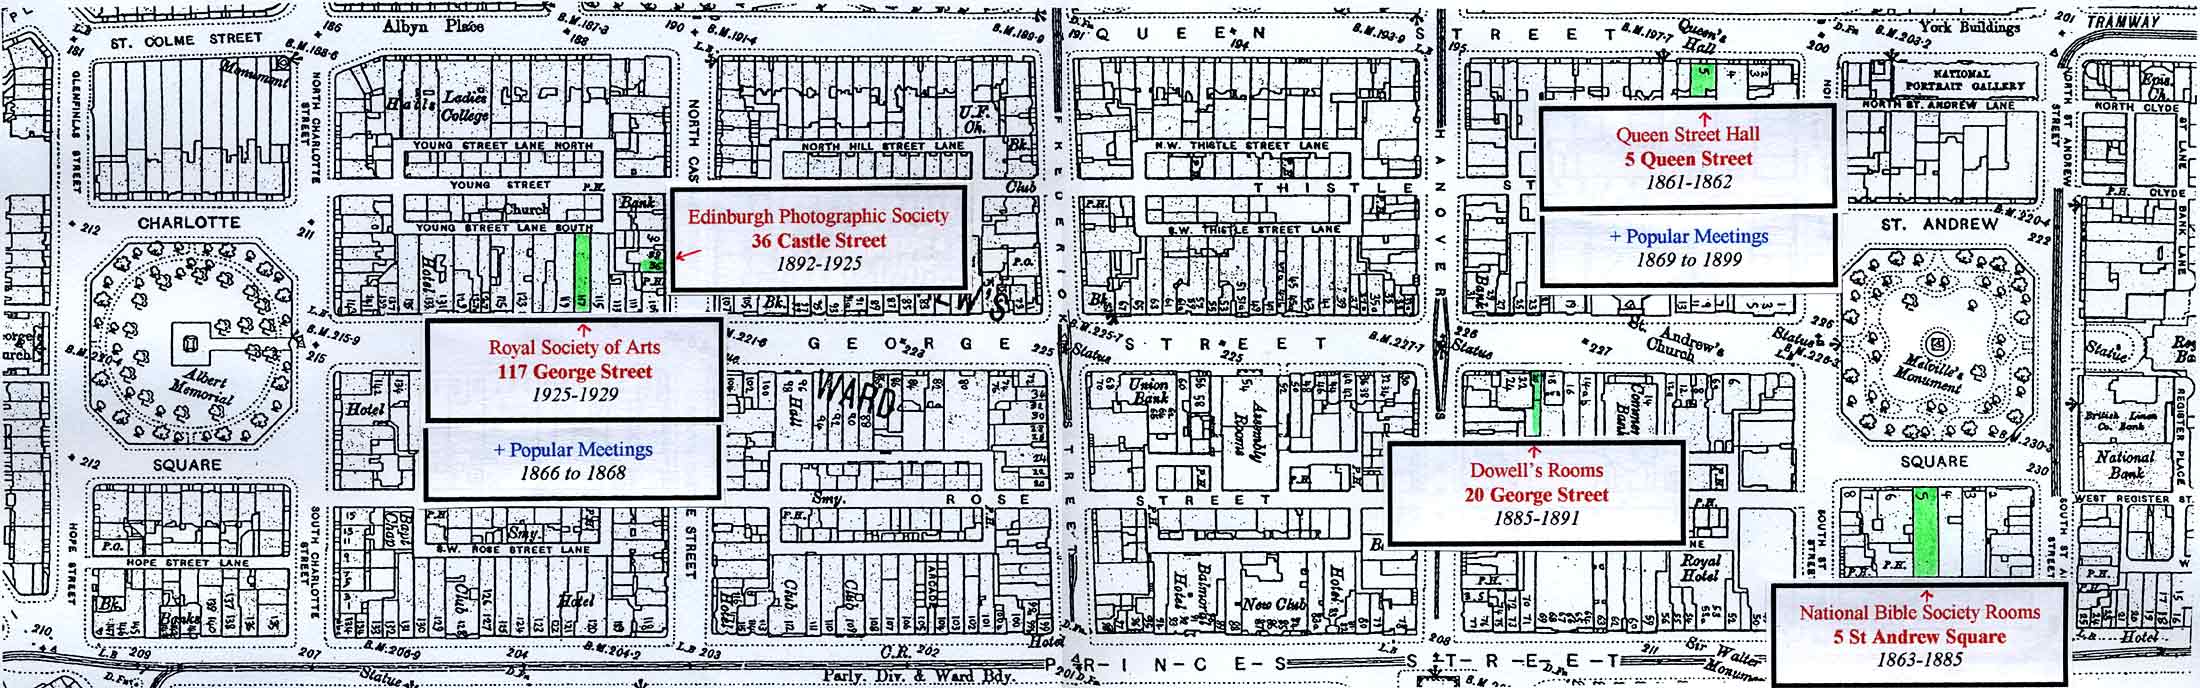 Edinburgh New Town  -  Enlarged map showing the Halls in which Edinburgh Photographic Society has held its Meetings